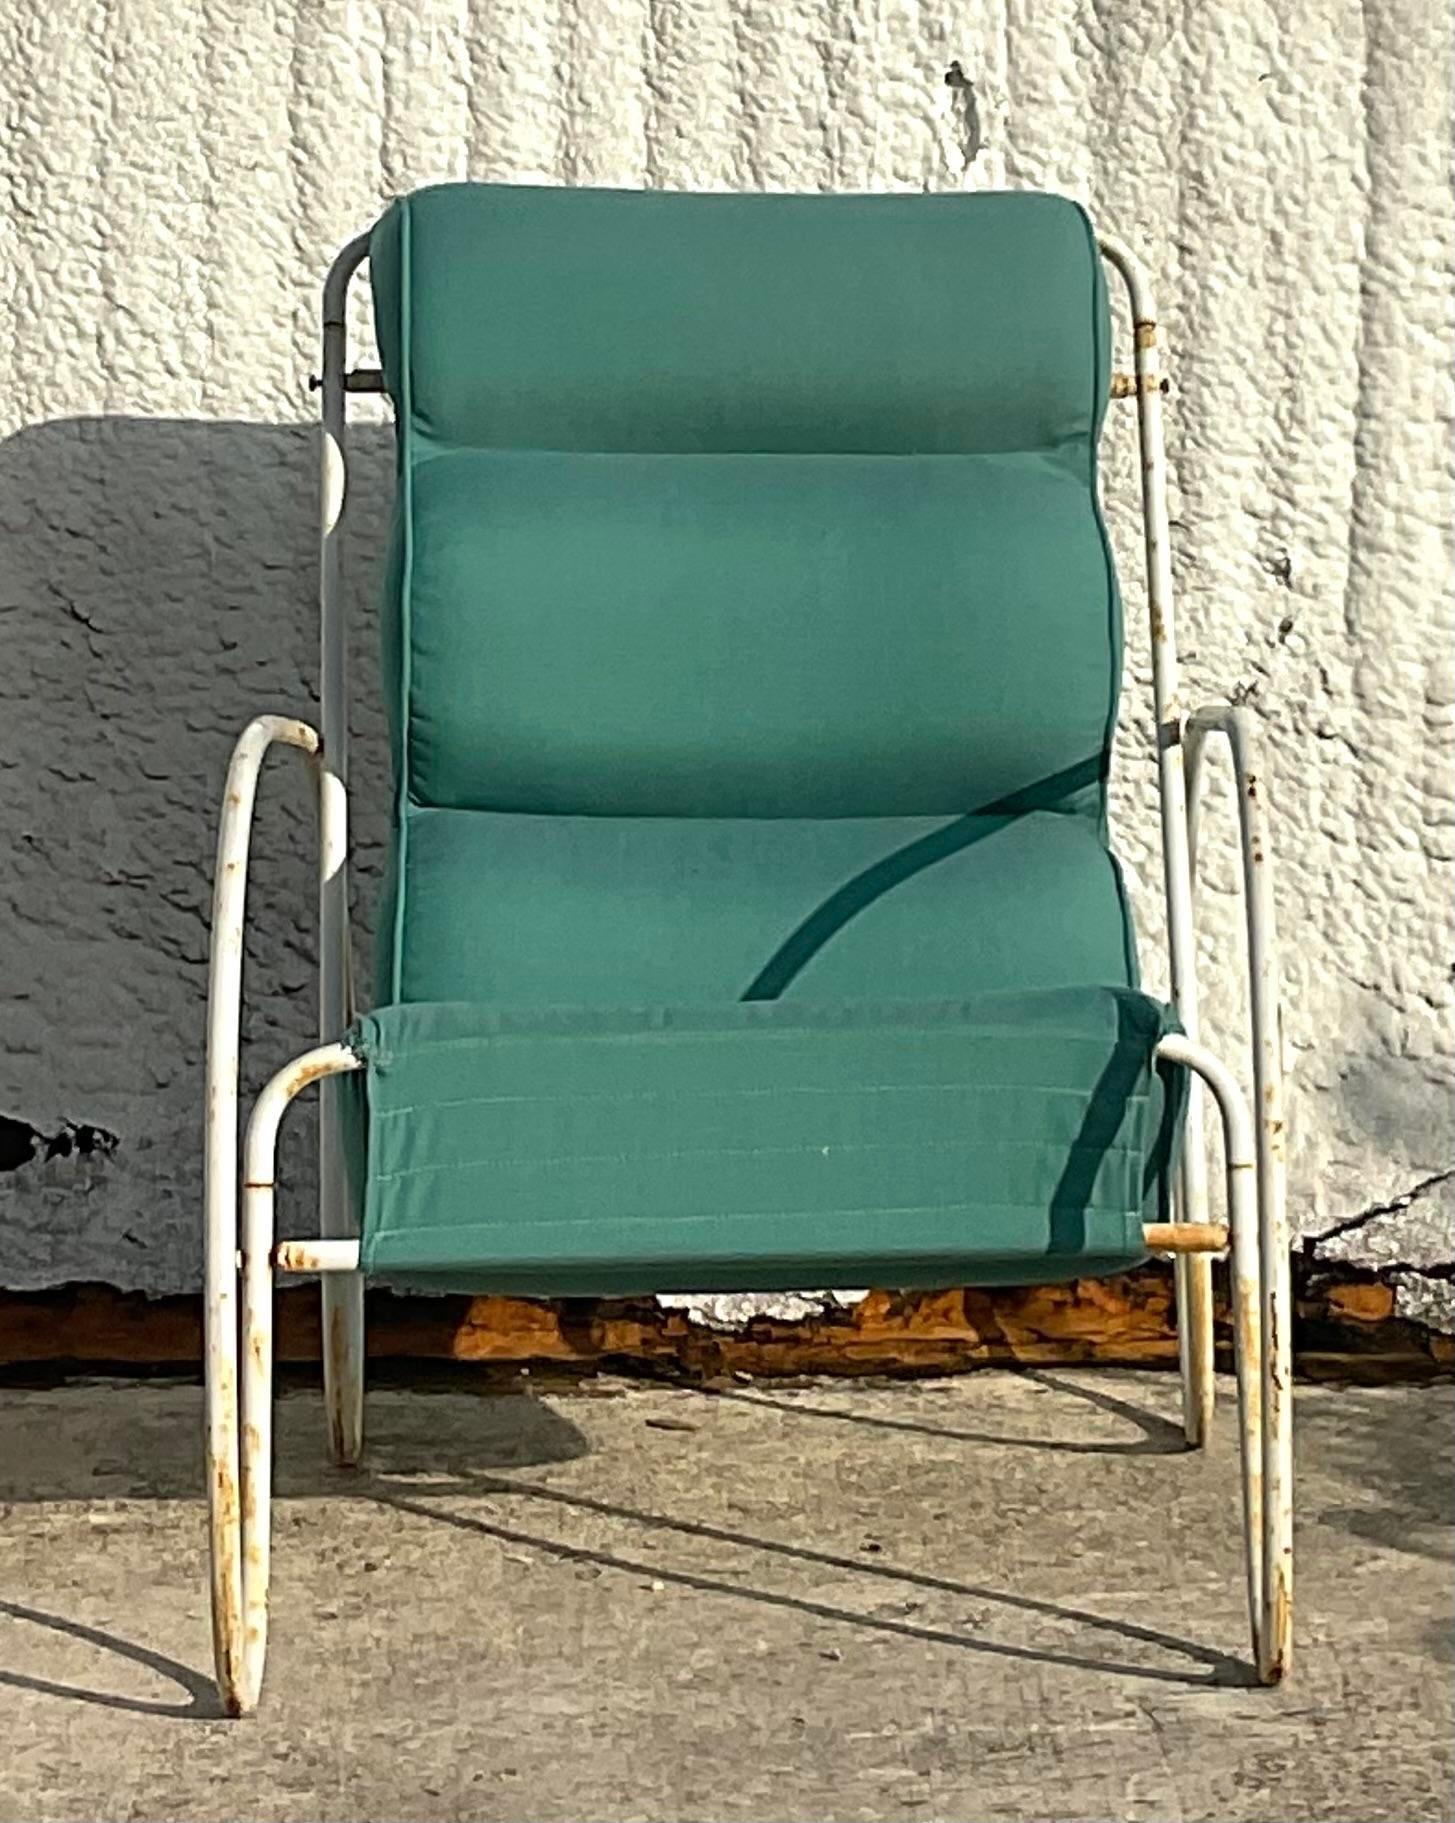 An exceptional vintage Boho outdoor lounge chairs. Done in the manner of Eileen Gray. A whimsical wrought iron frame with a channel tufted cushion. Perfect indoors our out. You decide! Acquired from a Palm Beach estate.

Seat height 15 